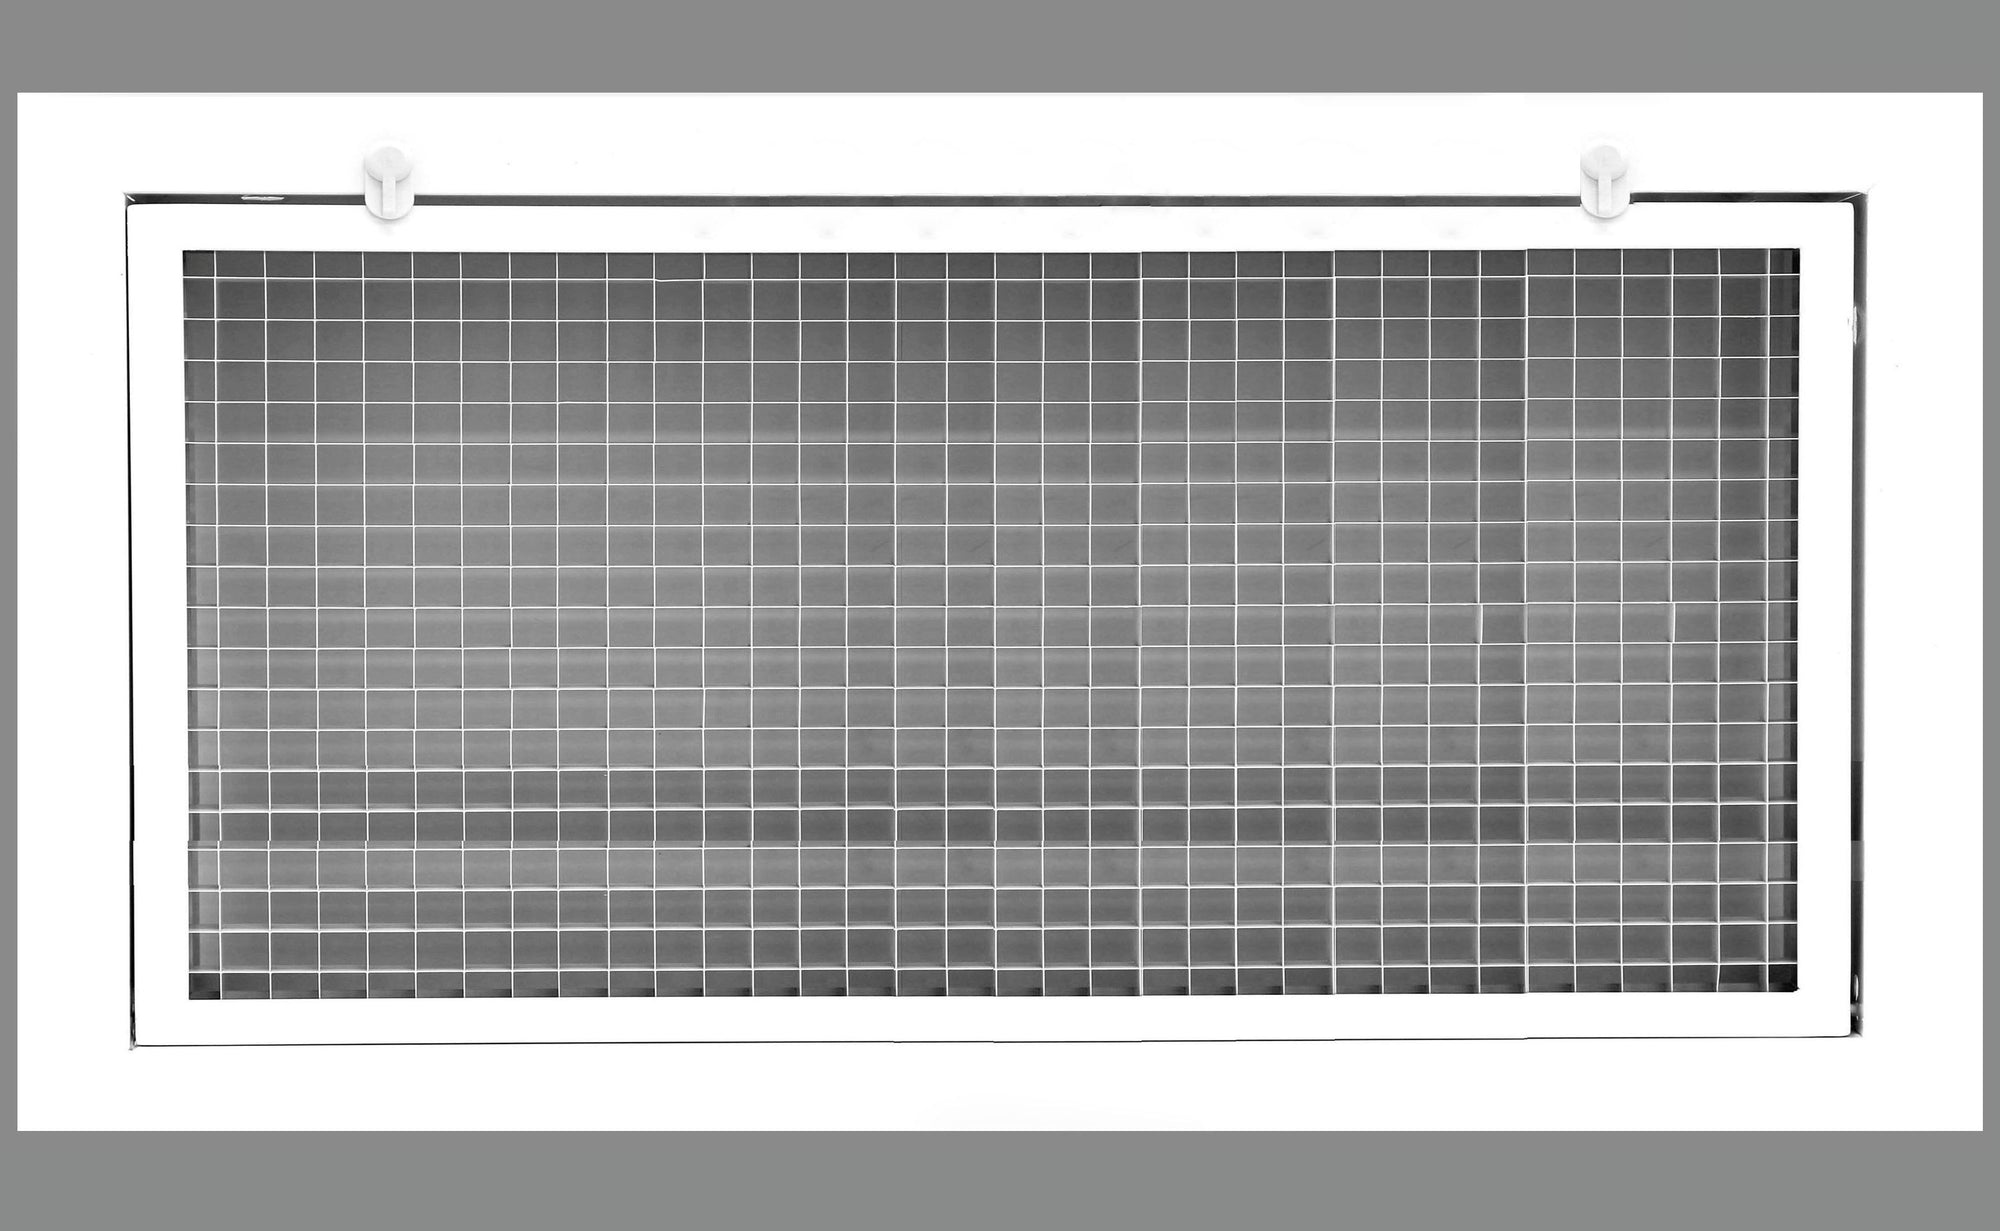 24" x 8" Cube Core Eggcrate Return Air Filter Grille for 1" Filter